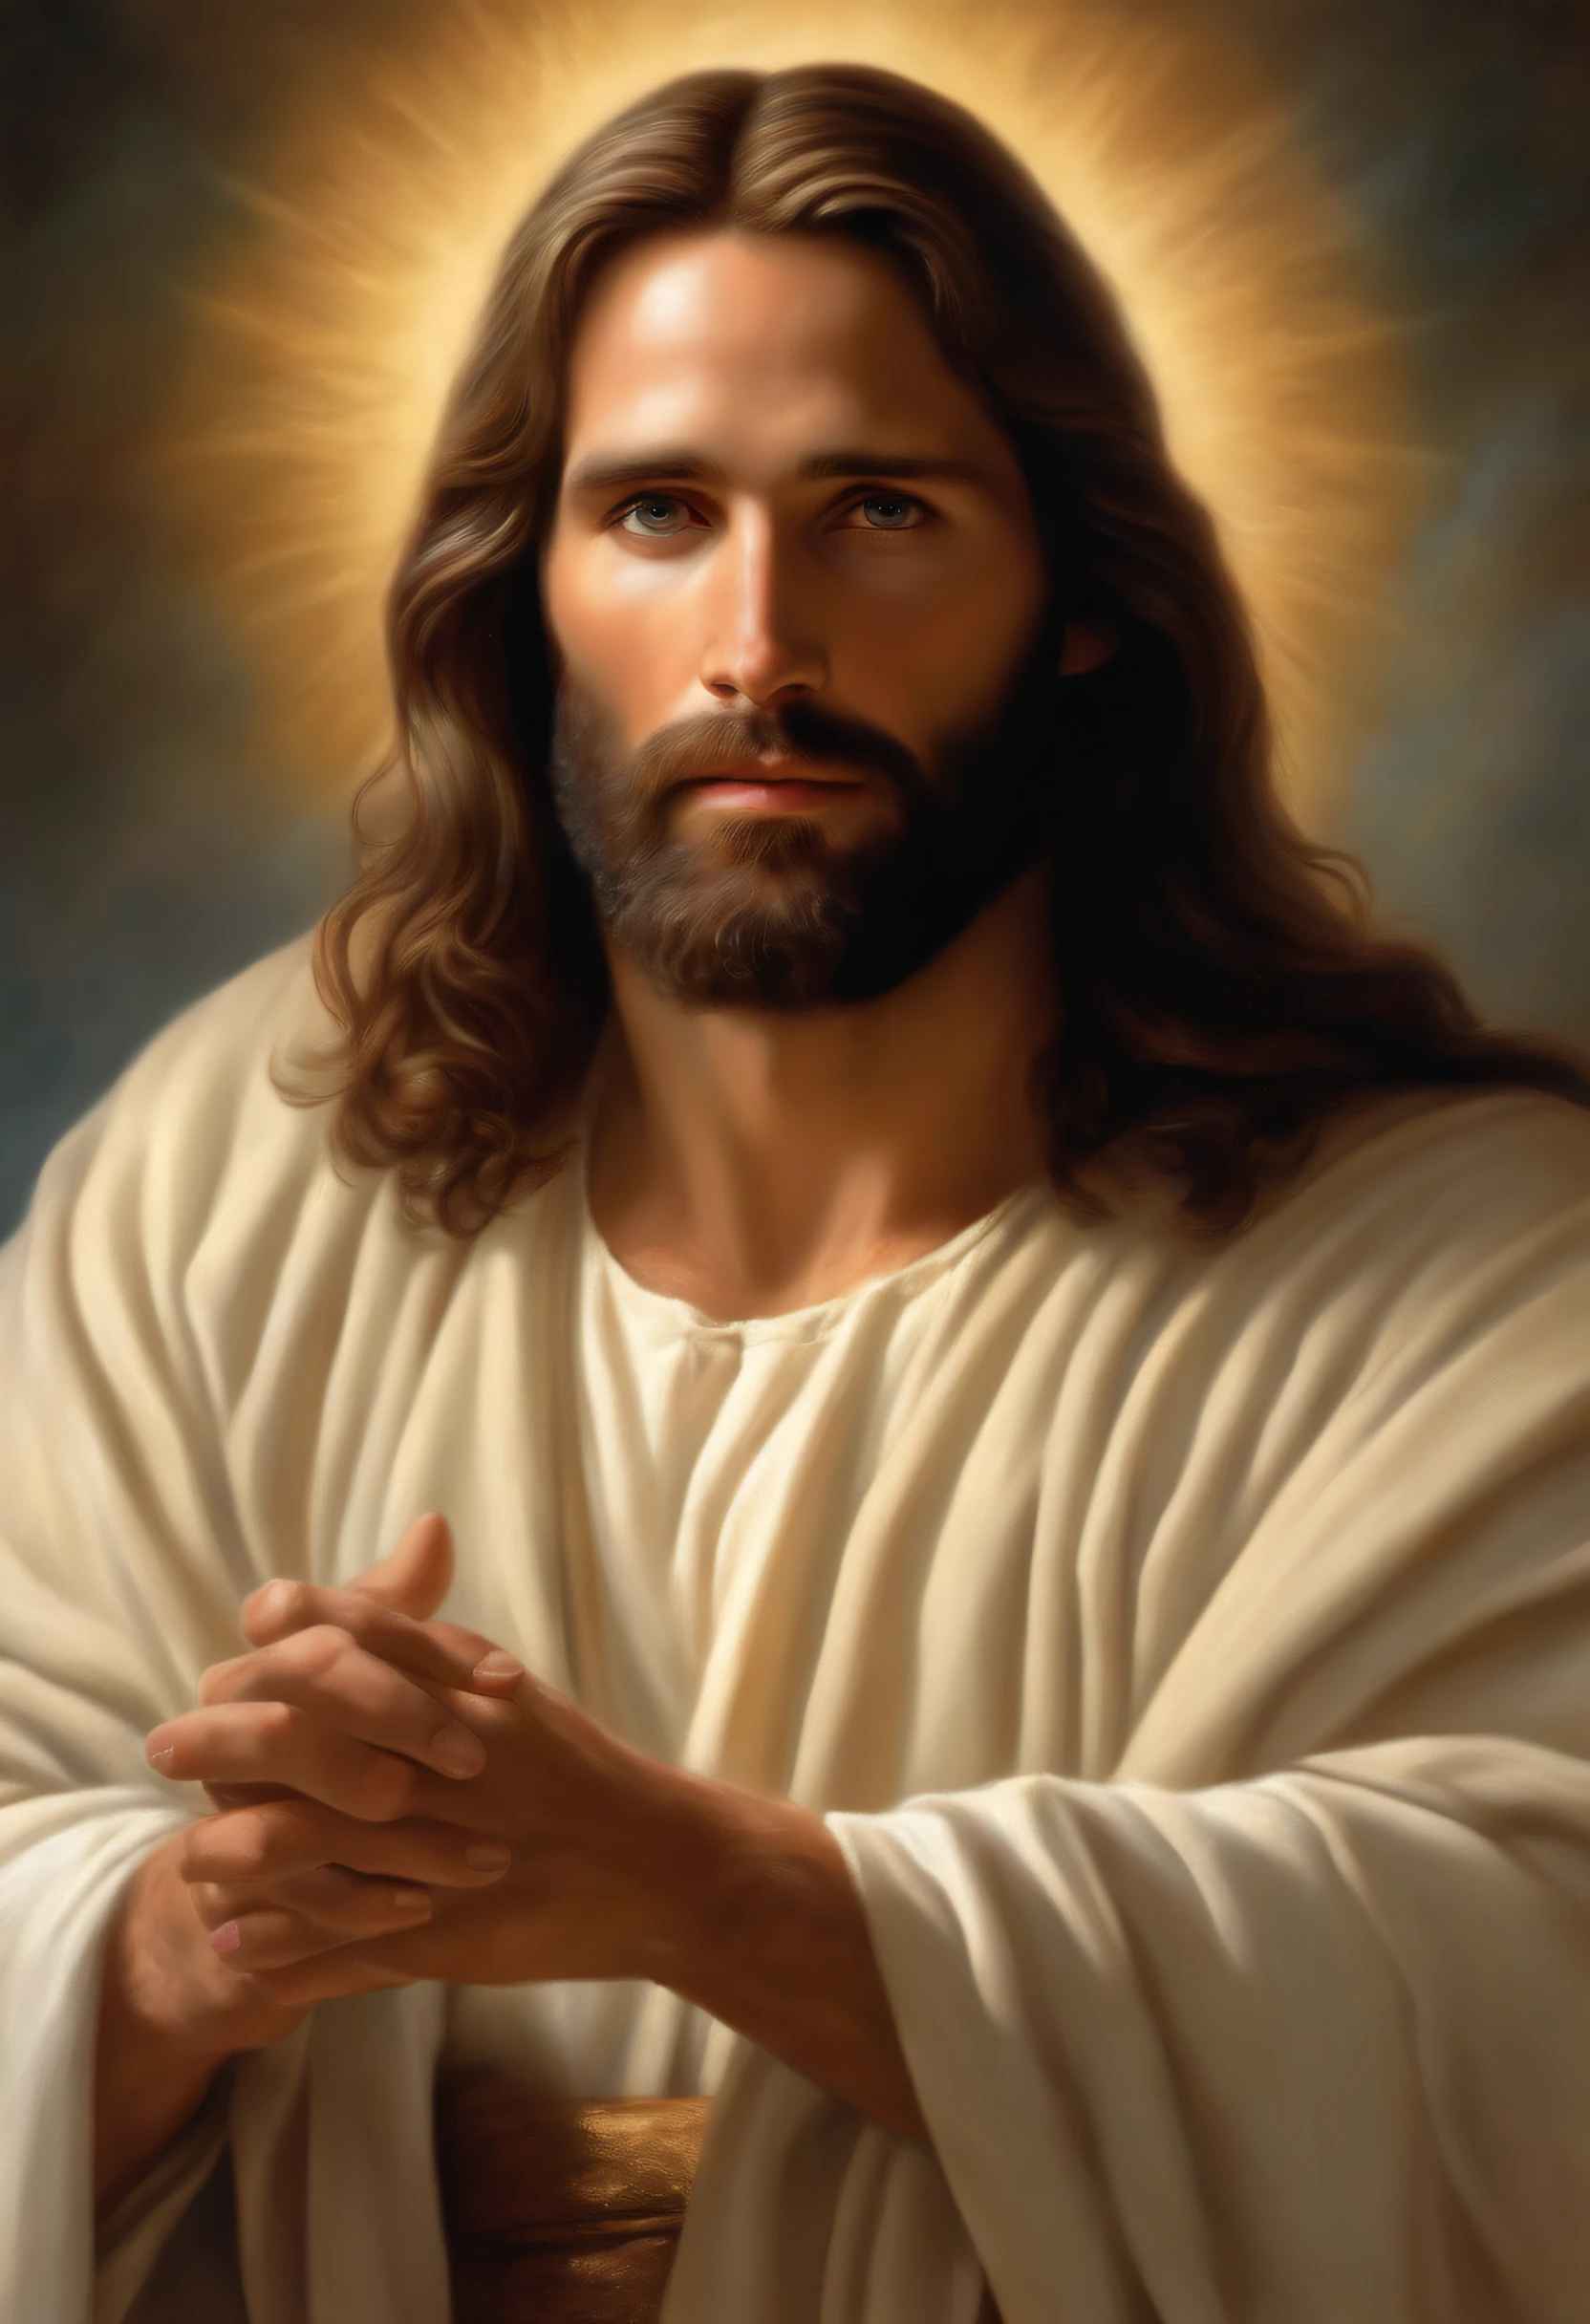 Arafed image of a man with long hair and beard, portrait of Jesus Christ, Jesus Christ, Greg Olsen, Jesus of Nazareth, painted in high resolution, The Lord and Savior, Jon McNaughton, 8K resolution. Oil on canvas, face of Jesus, portrait of religious masterpiece, ultra detail. Digital painting, dressed as Jesus Christ, very beautiful portrait, heavenly background